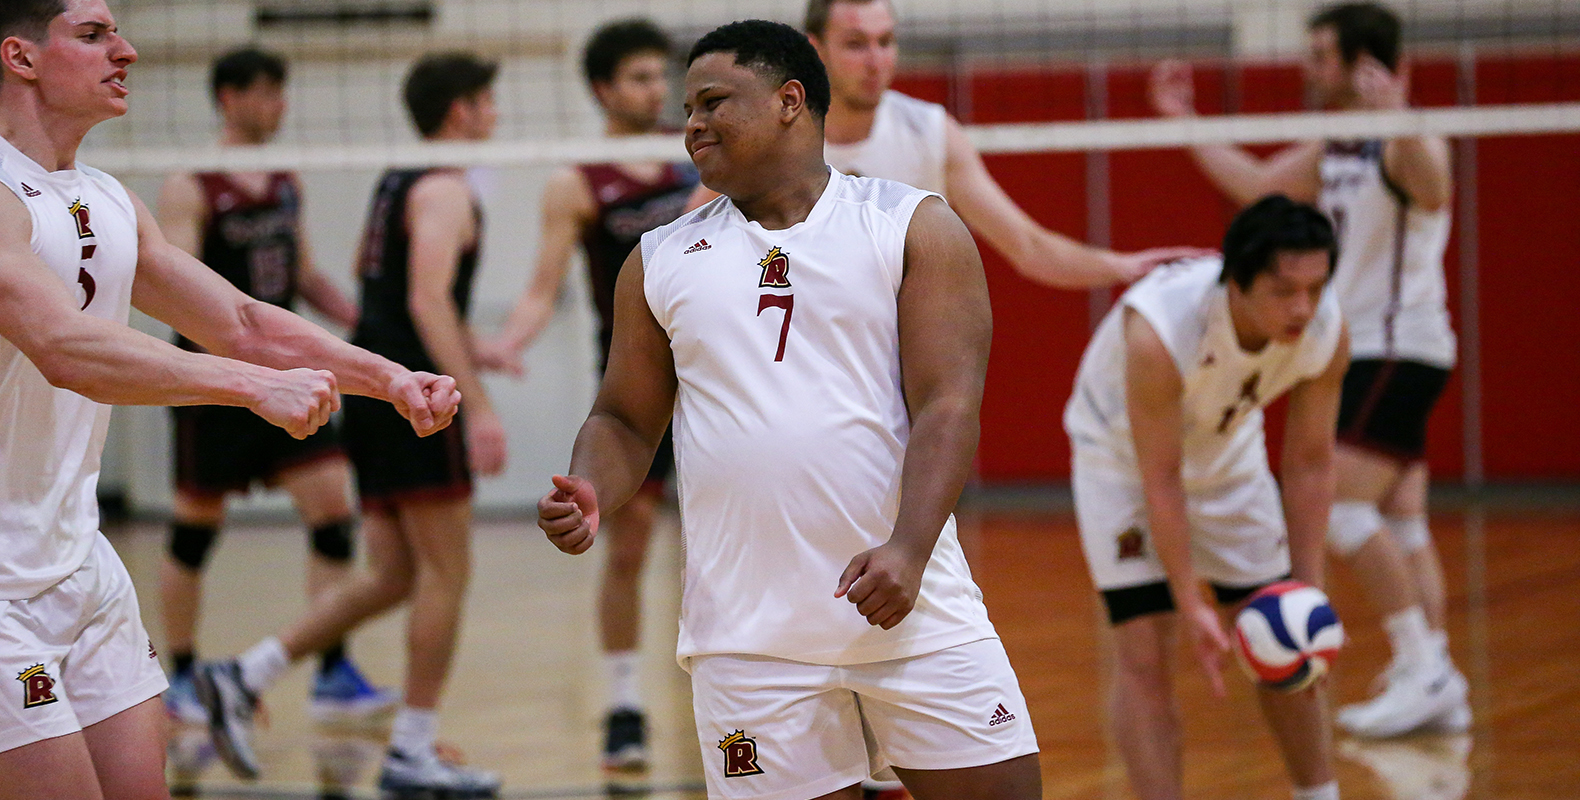 Pride Volleyball Sweeps Dean Tuesday Night